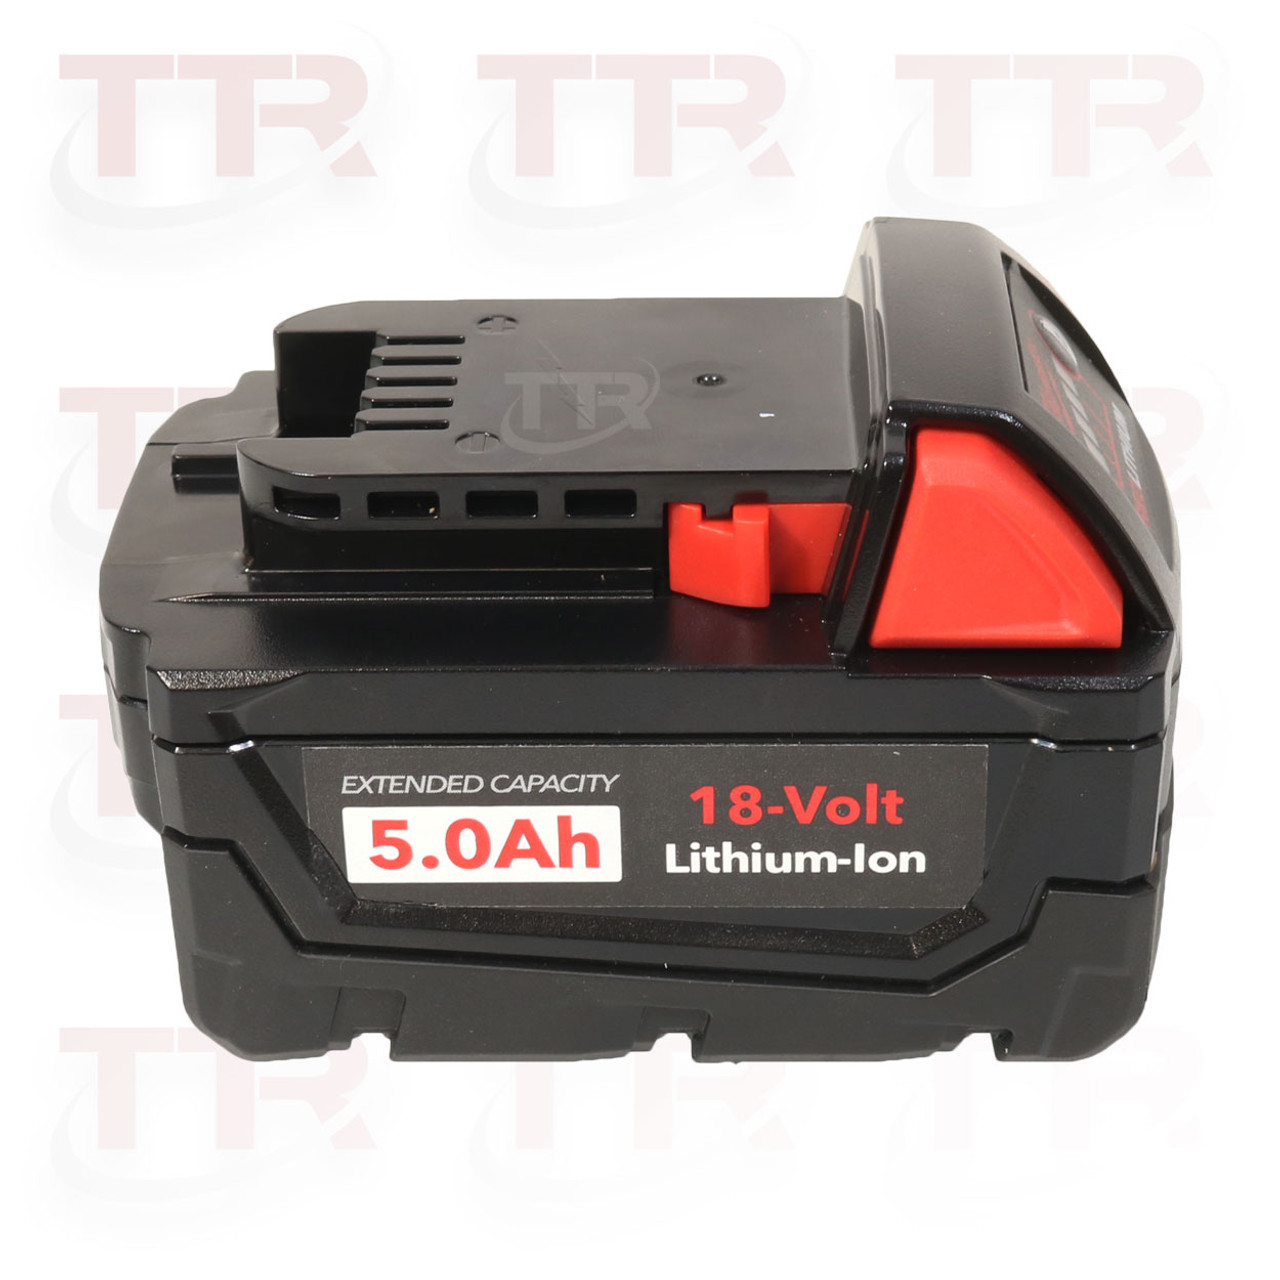 TTR N5-4349-A 18-Volt Extended Capacity 5.0 Ah Battery for Fromm Strapping Tools